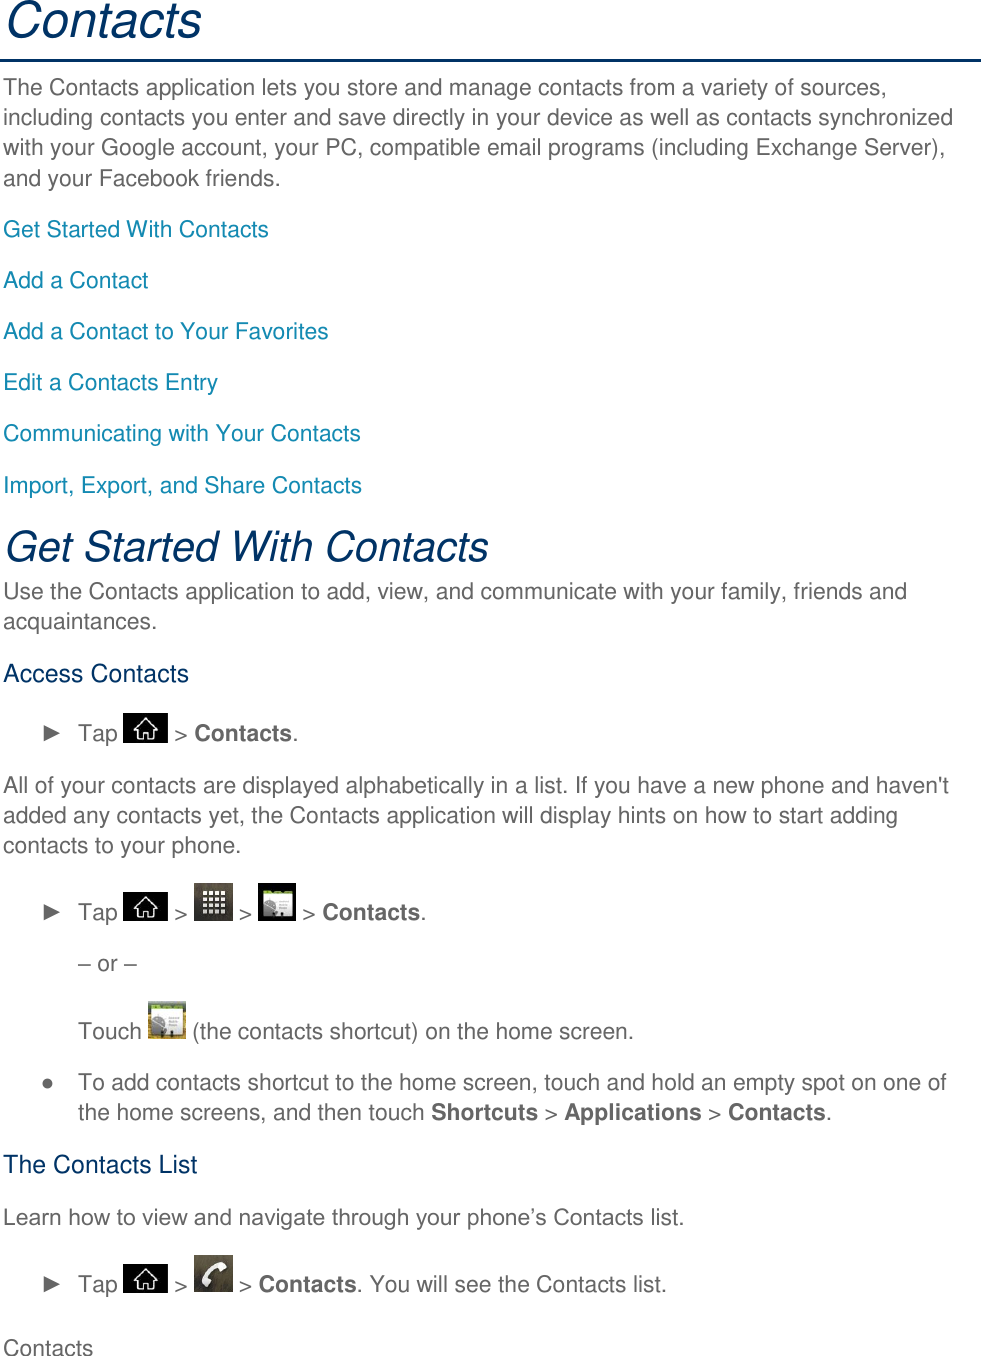 Contacts     Contacts The Contacts application lets you store and manage contacts from a variety of sources, including contacts you enter and save directly in your device as well as contacts synchronized with your Google account, your PC, compatible email programs (including Exchange Server), and your Facebook friends. Get Started With Contacts Add a Contact Add a Contact to Your Favorites Edit a Contacts Entry Communicating with Your Contacts Import, Export, and Share Contacts Get Started With Contacts Use the Contacts application to add, view, and communicate with your family, friends and acquaintances. Access Contacts   Tap   &gt; Contacts. All of your contacts are displayed alphabetically in a list. If you have a new phone and haven&apos;t added any contacts yet, the Contacts application will display hints on how to start adding contacts to your phone.   Tap   &gt;   &gt;   &gt; Contacts.  or   Touch   (the contacts shortcut) on the home screen.   To add contacts shortcut to the home screen, touch and hold an empty spot on one of the home screens, and then touch Shortcuts &gt; Applications &gt; Contacts. The Contacts List list.   Tap   &gt;   &gt; Contacts. You will see the Contacts list. 